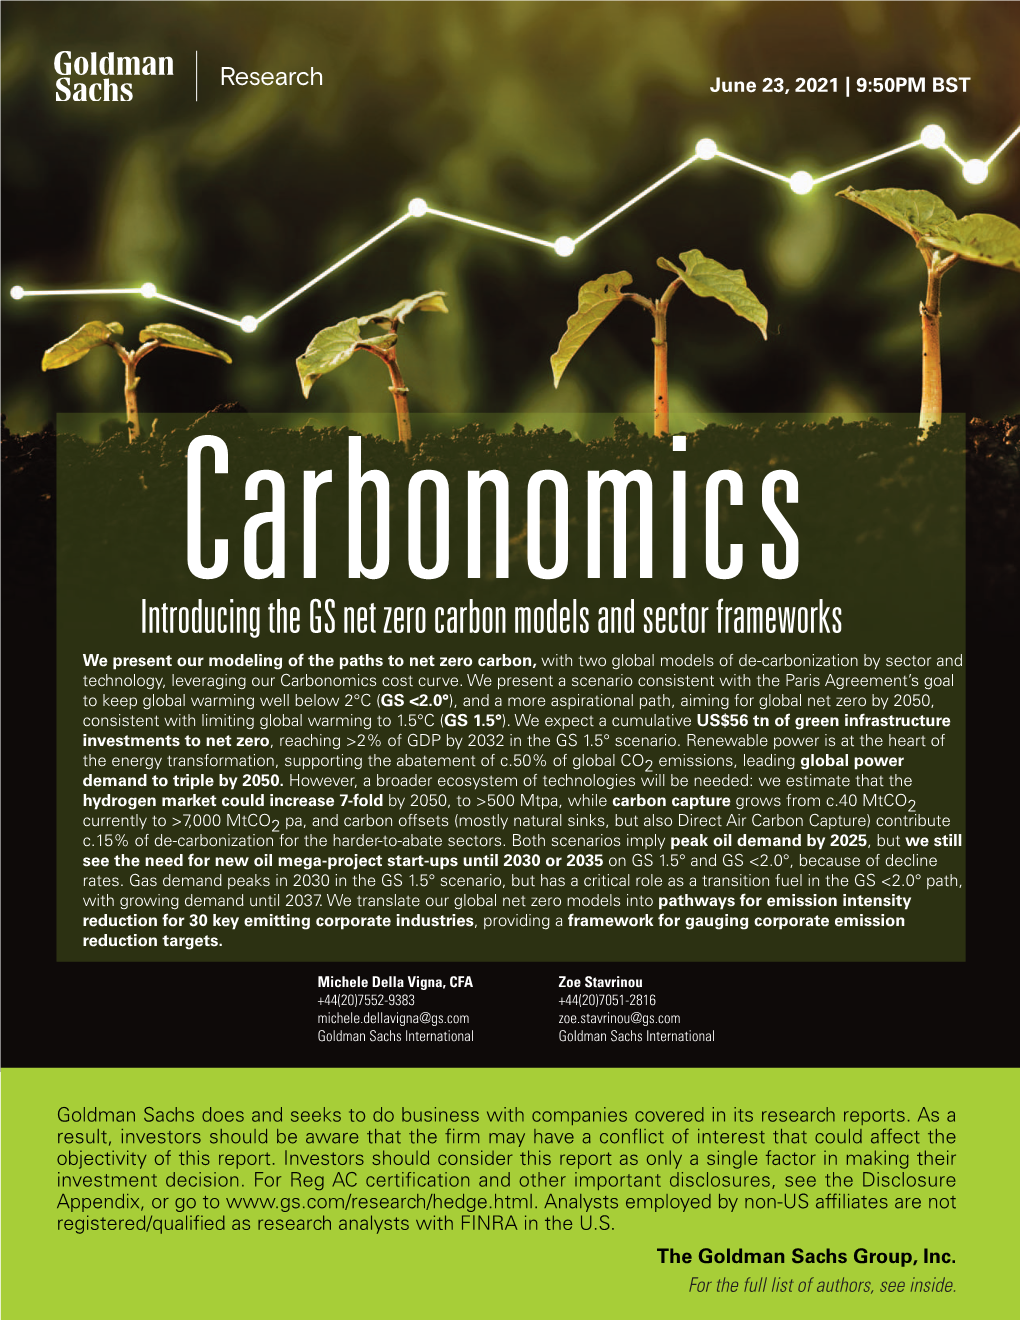 Introducing the GS Net Zero Carbon Models and Sector Frameworks